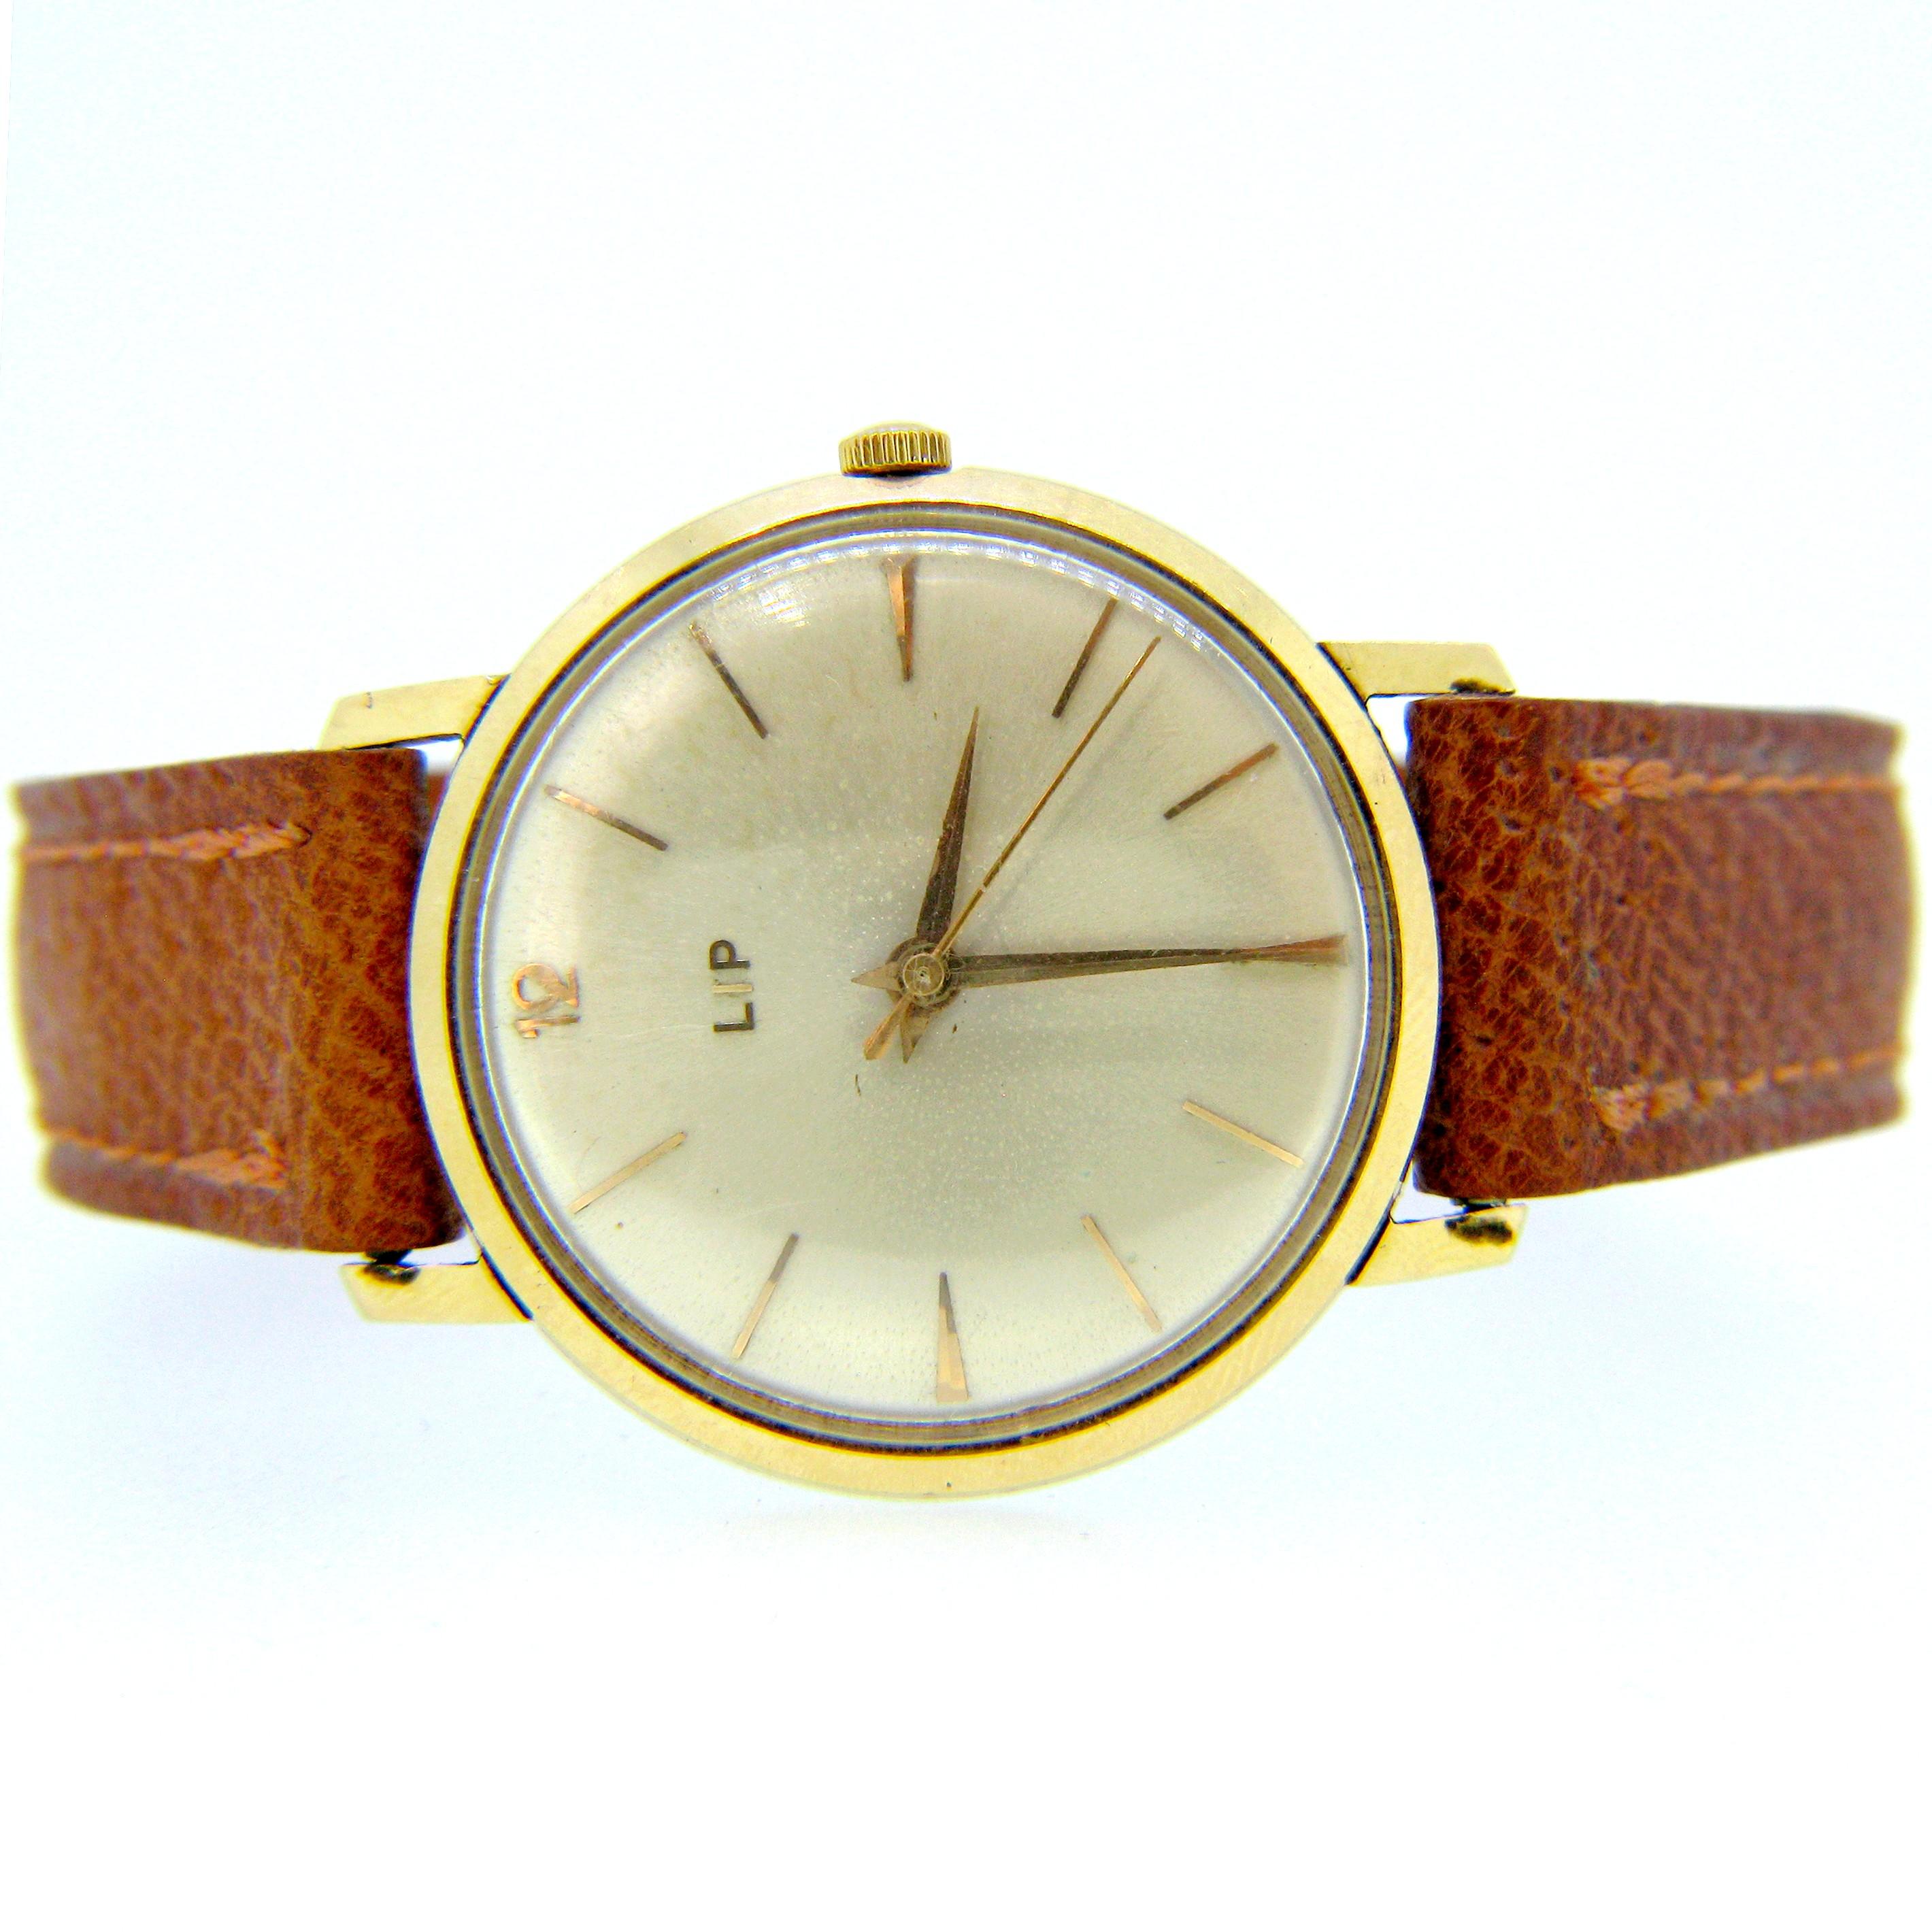 This vintage Lip watch from the 60's is manual winding. The movement is LIP R138 and serial number 87375. The case is made in 18kt yellow gold and the bracelet is tan colour. It works well. The back is signed and numbered with the 